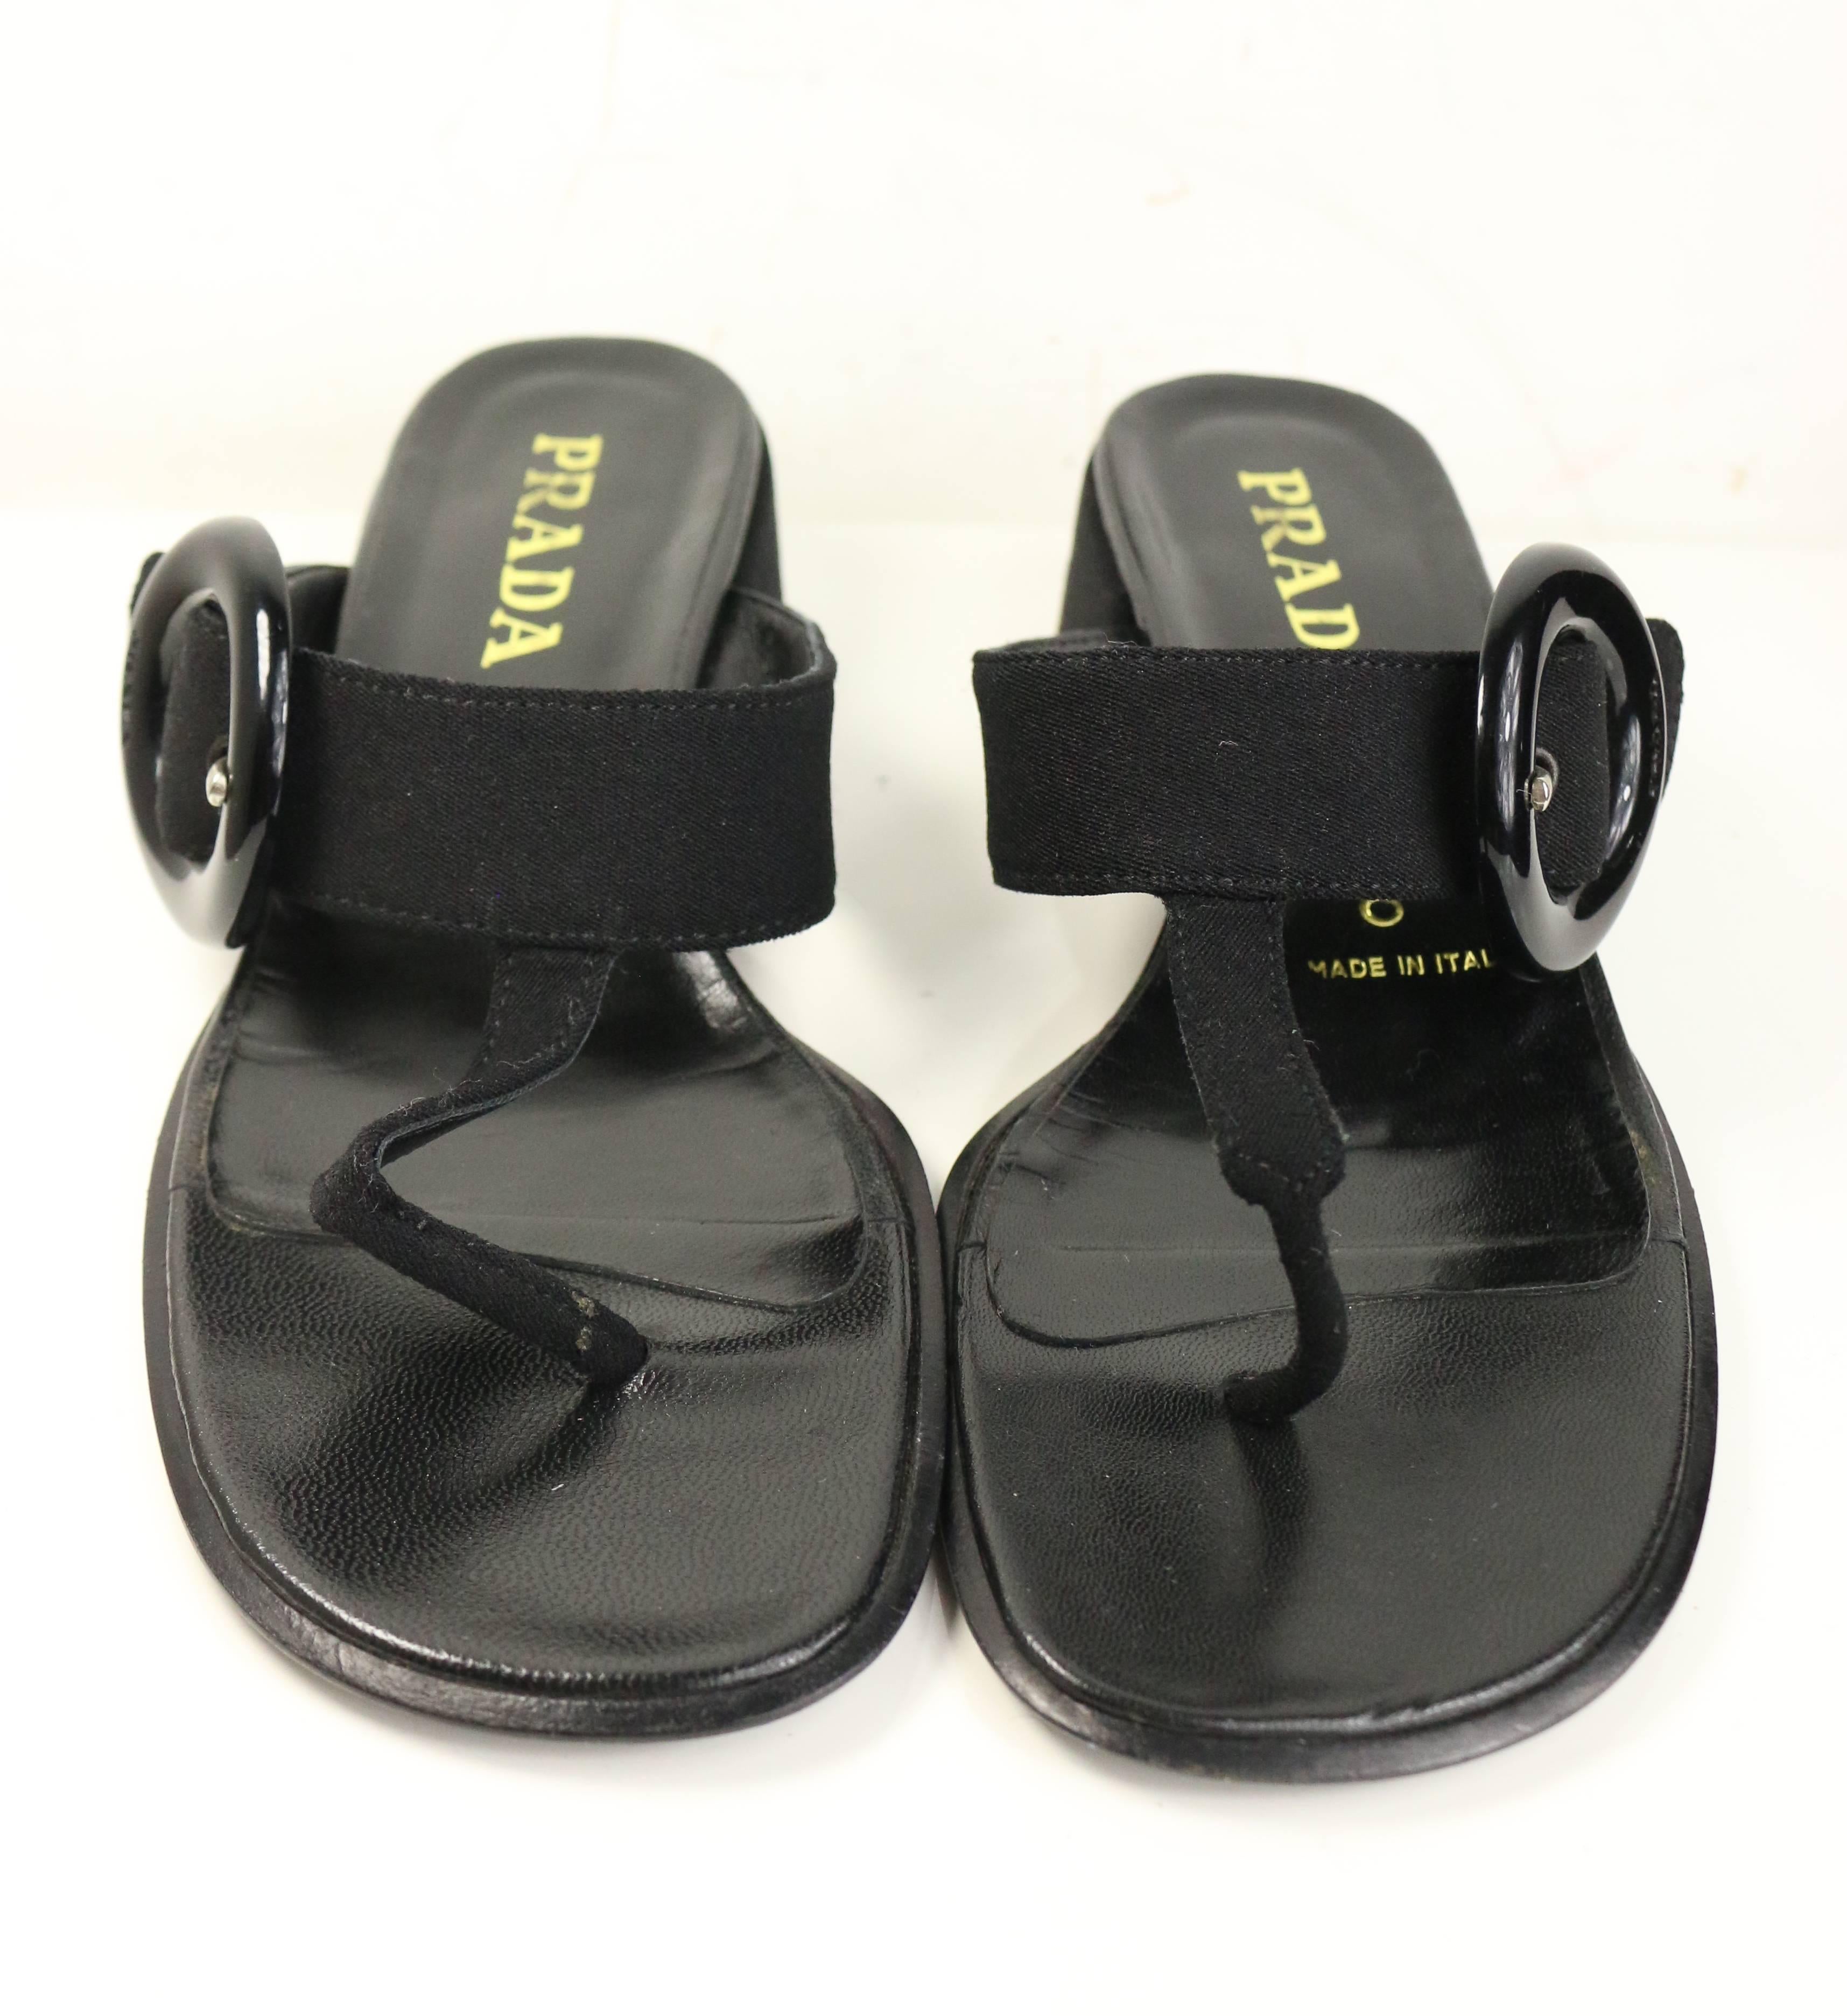 - Vintage 90s Prada black retro style T - shape sandals. Featuring a black vinyl buckle on the side. Looks super retro and chic! 

- Made in Italy. 

- Size 37.5. 

